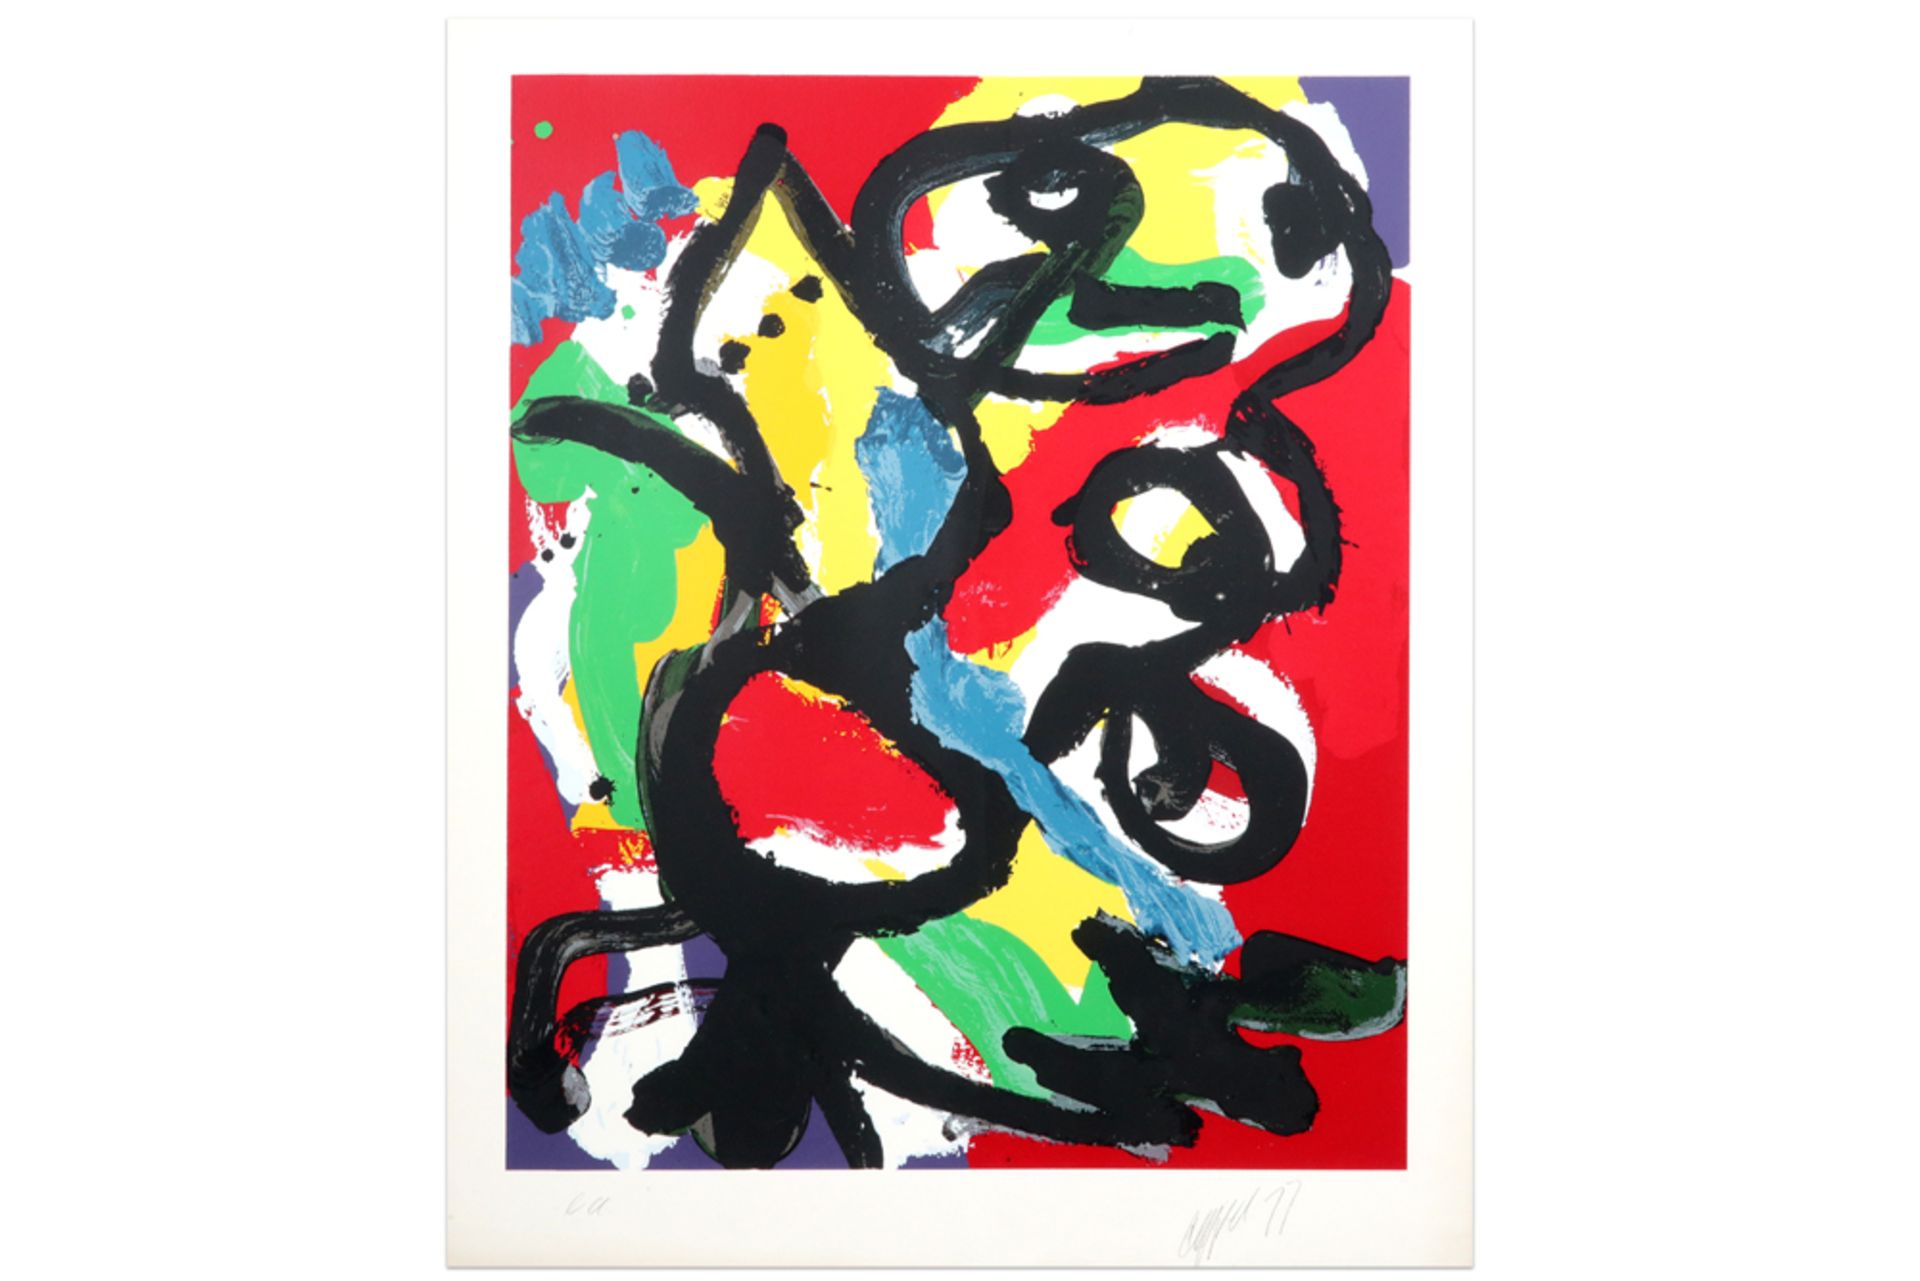 Karel Appel signed and (19)77 dated lithograph printed in colors from the "Seven Summer Days"